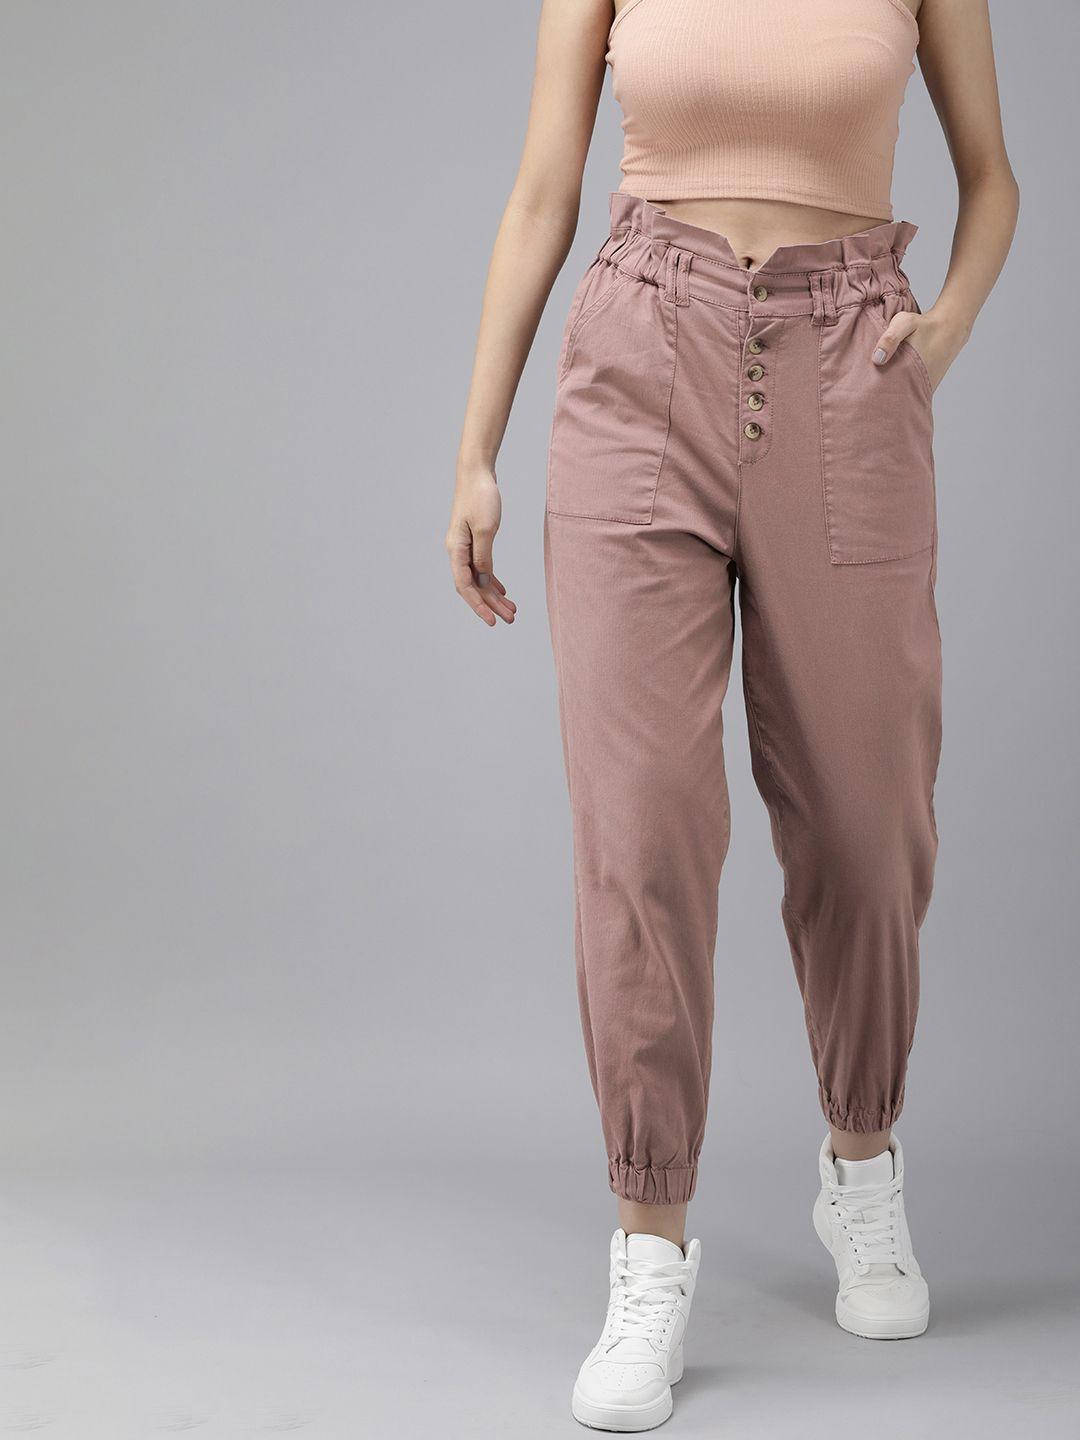 the roadster life co. women mid-rise joggers